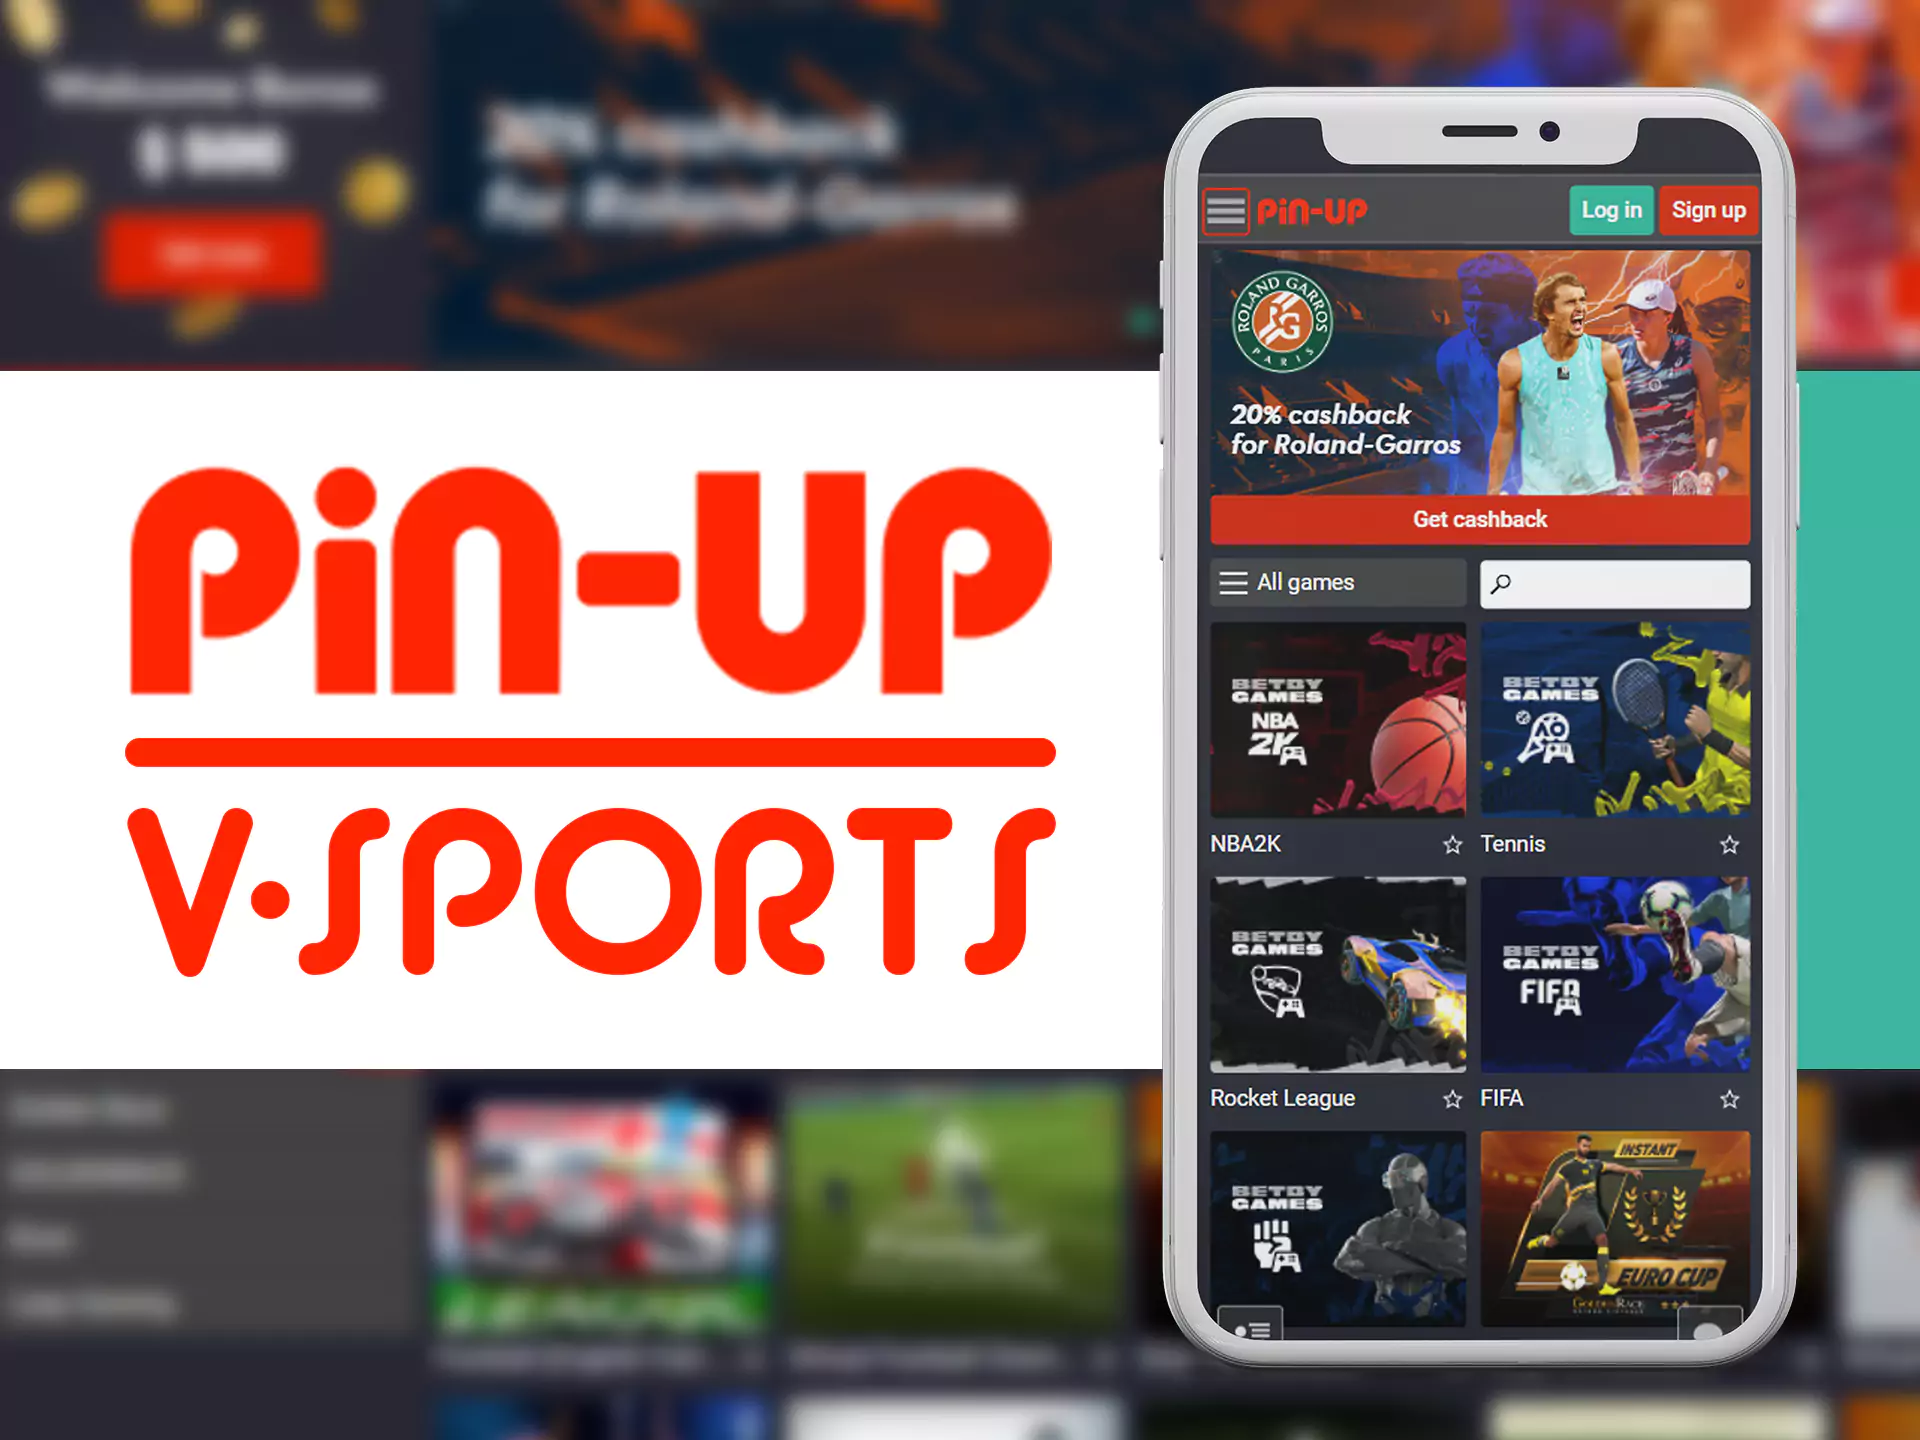 There are also a lot of markets on the virtual sports in the Pin-Up app.